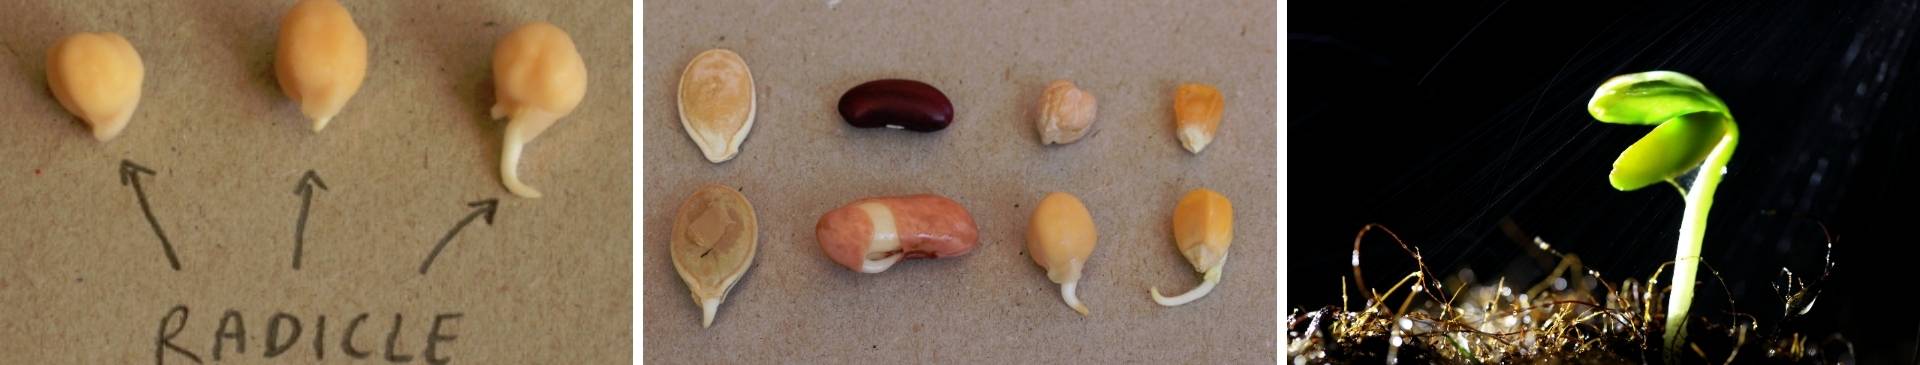 Do I need to orientate my seeds when sowing?